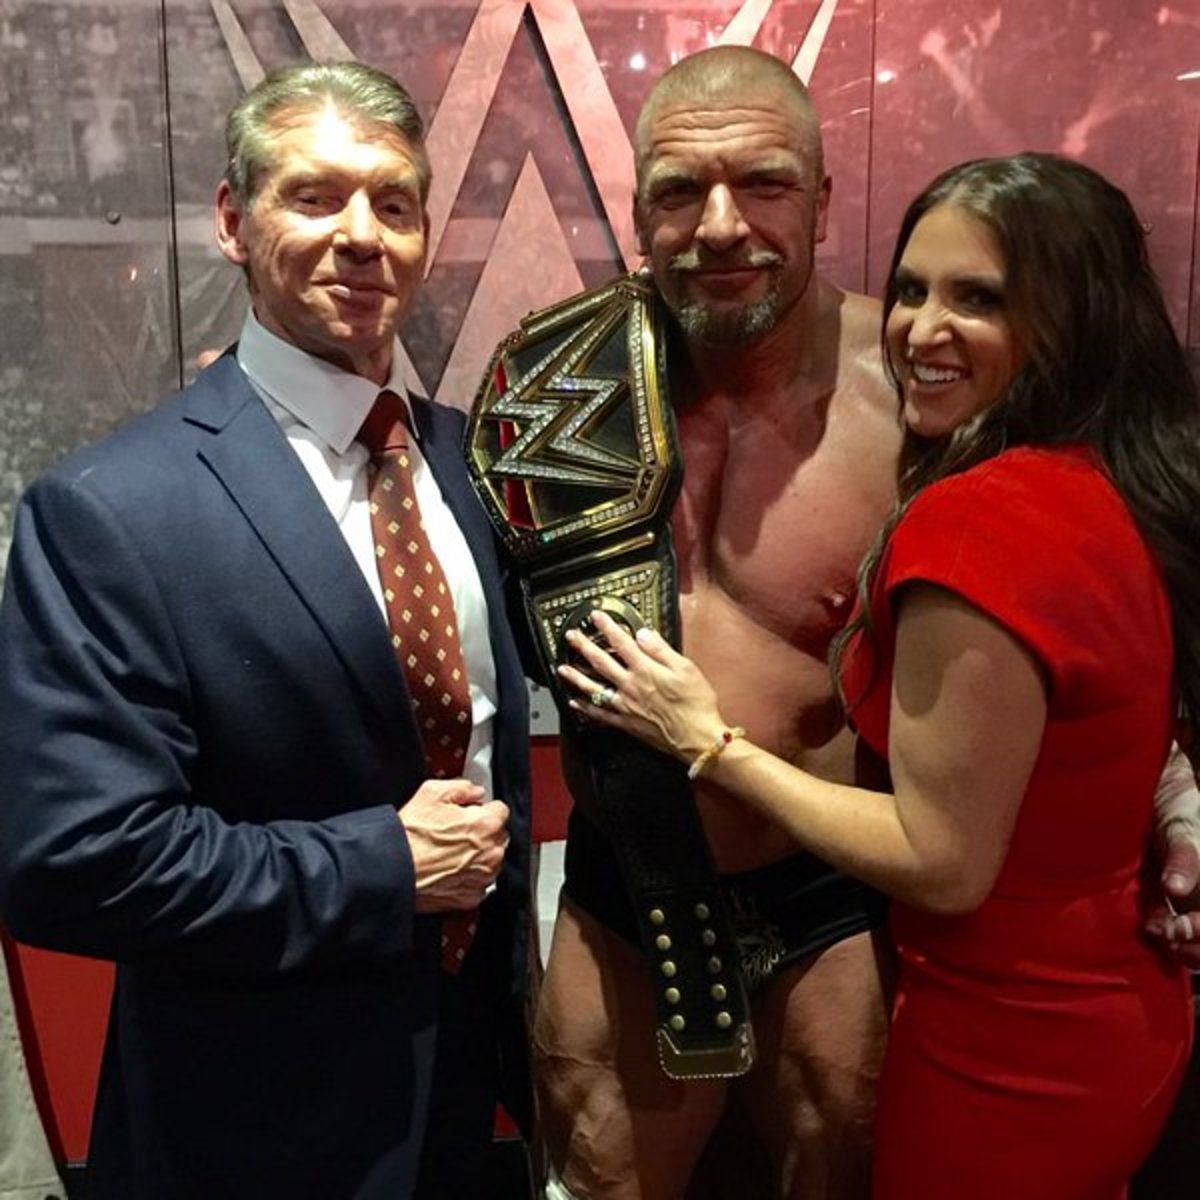 Triple H, Vince and Stephanie after the Game won the WWE Championship